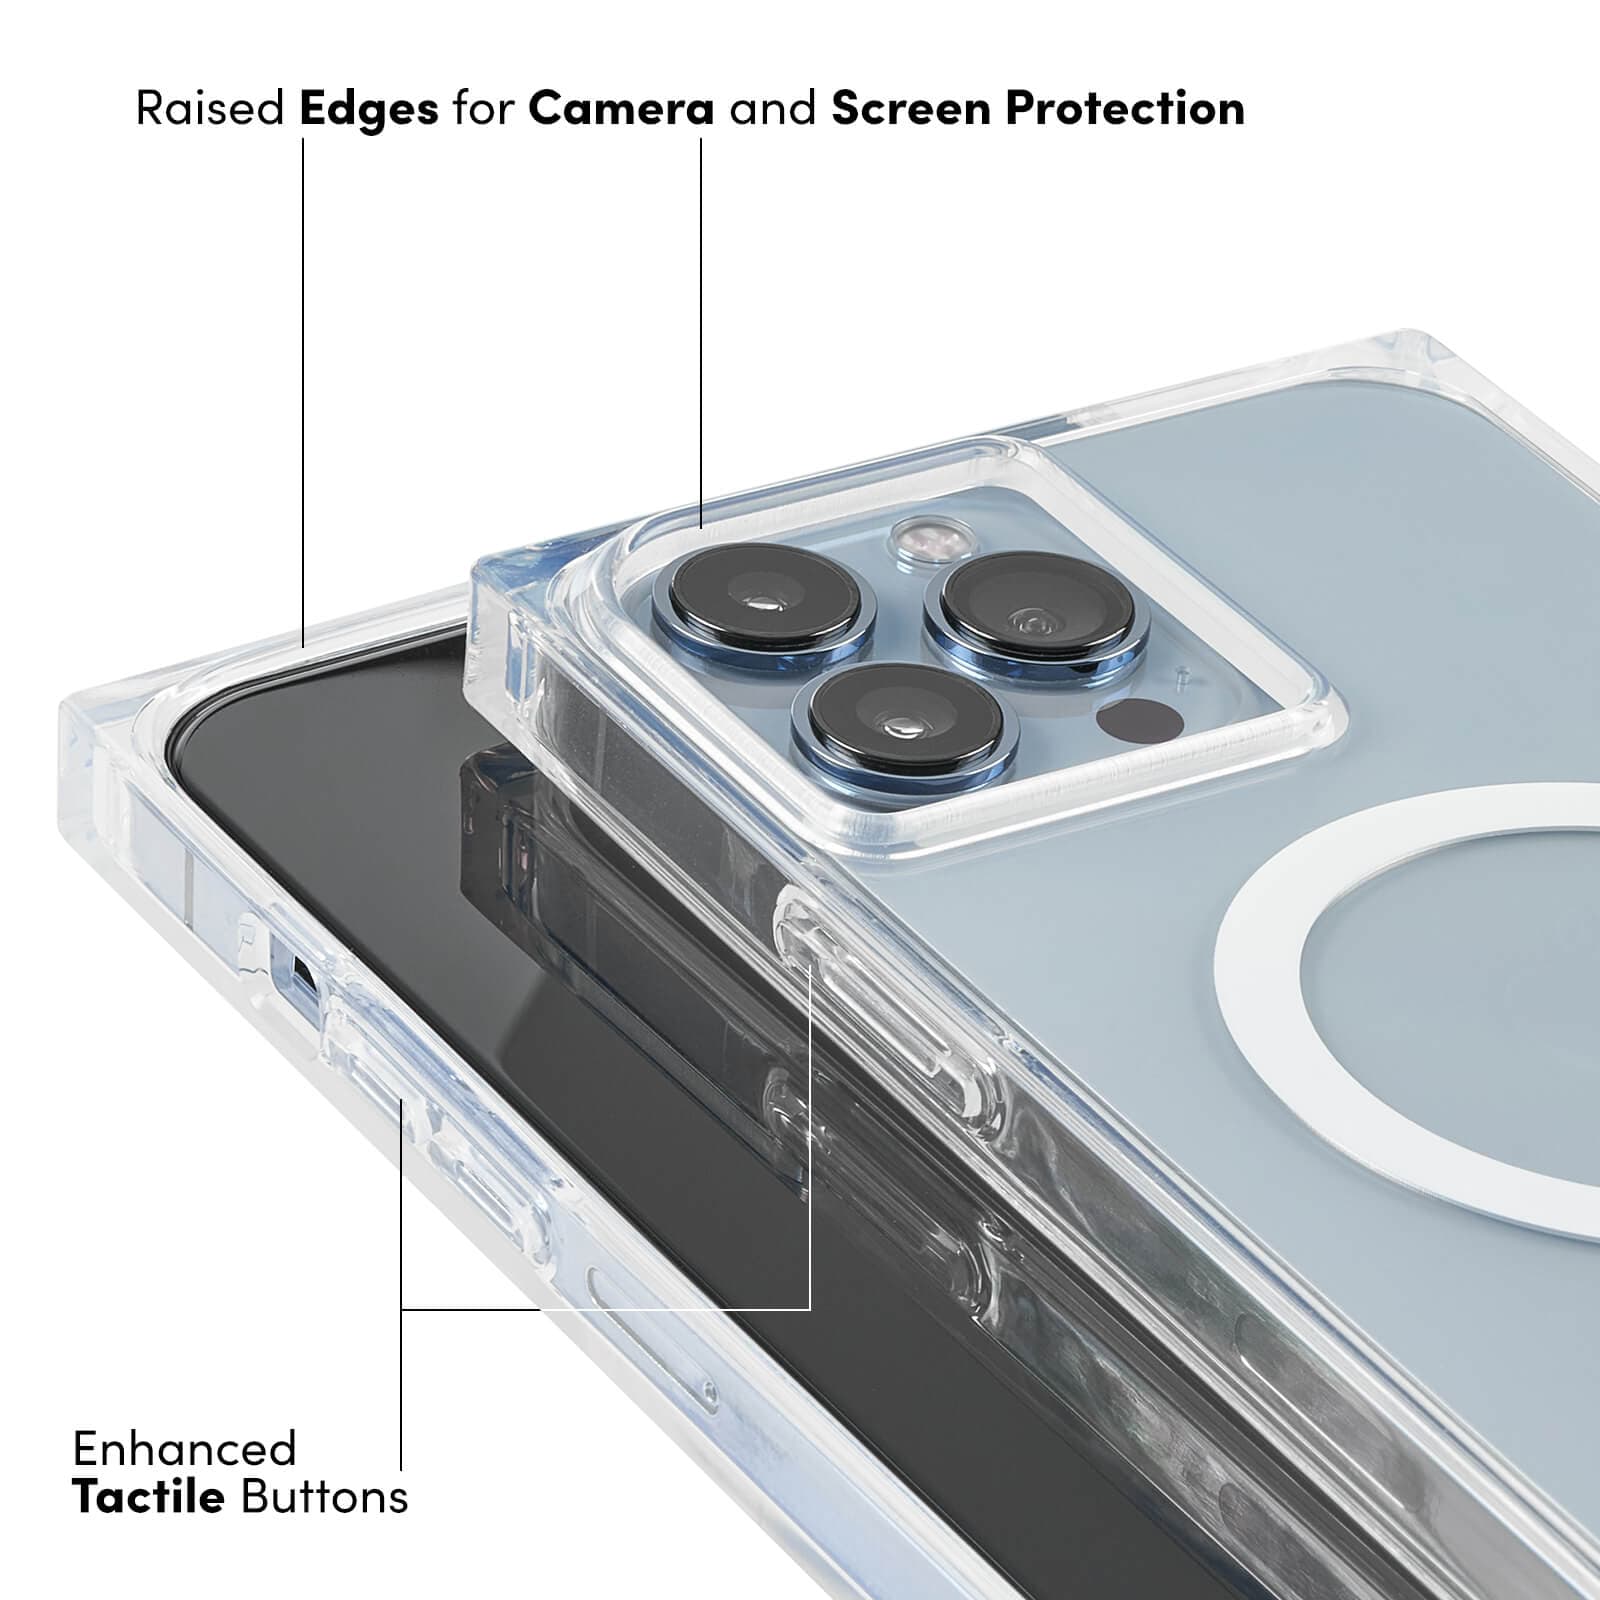 RAISED EDGES FOR CAMERA AND SCREEN PROTECTION, ENHANCED TACTILE BUTTONS. COLOR::CLEAR